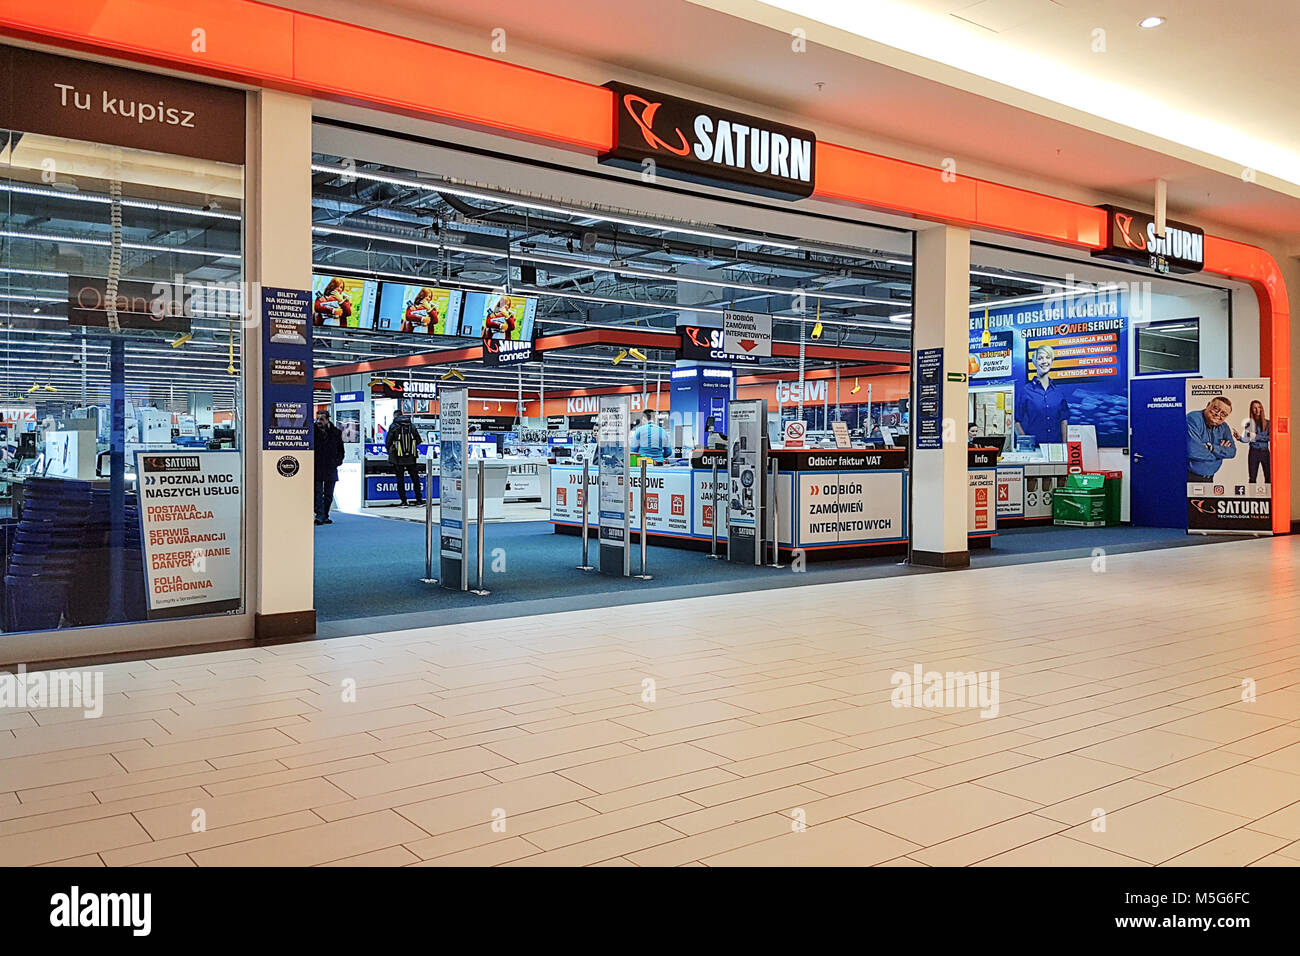 Krakow, Poland - February 21, 2018: Exterior view of The Saturn Market. Saturn is a German chain of stores selling consumer electronics with numerous  Stock Photo